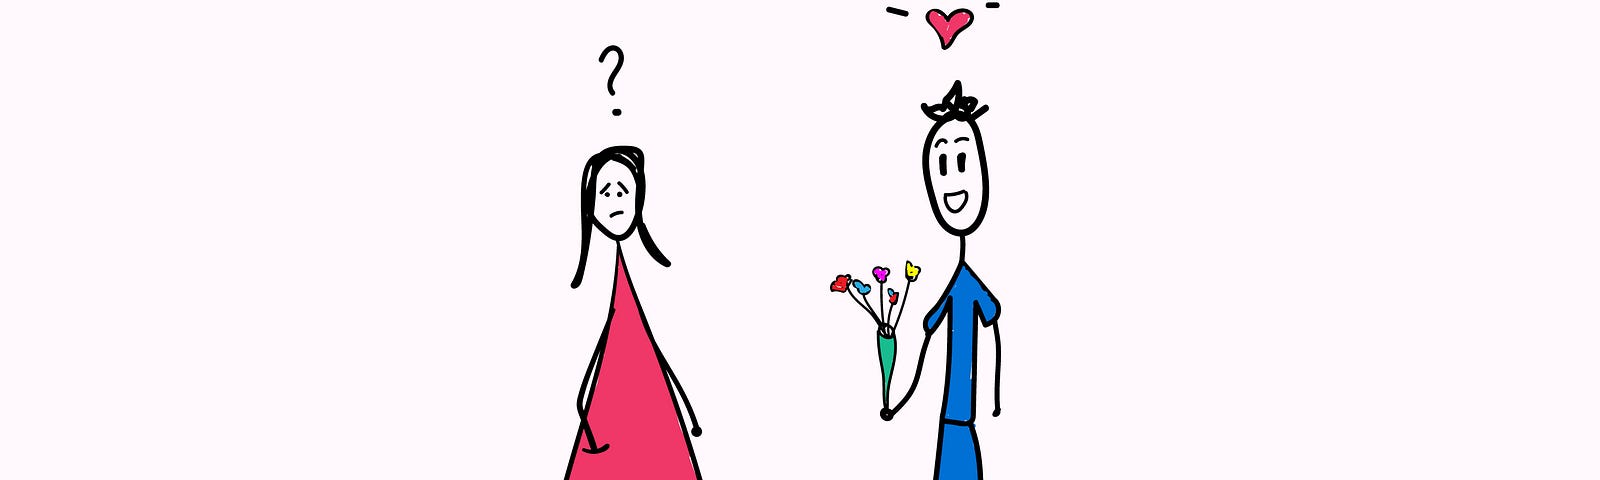 Illustration of confused girl and a guy holding bouquet